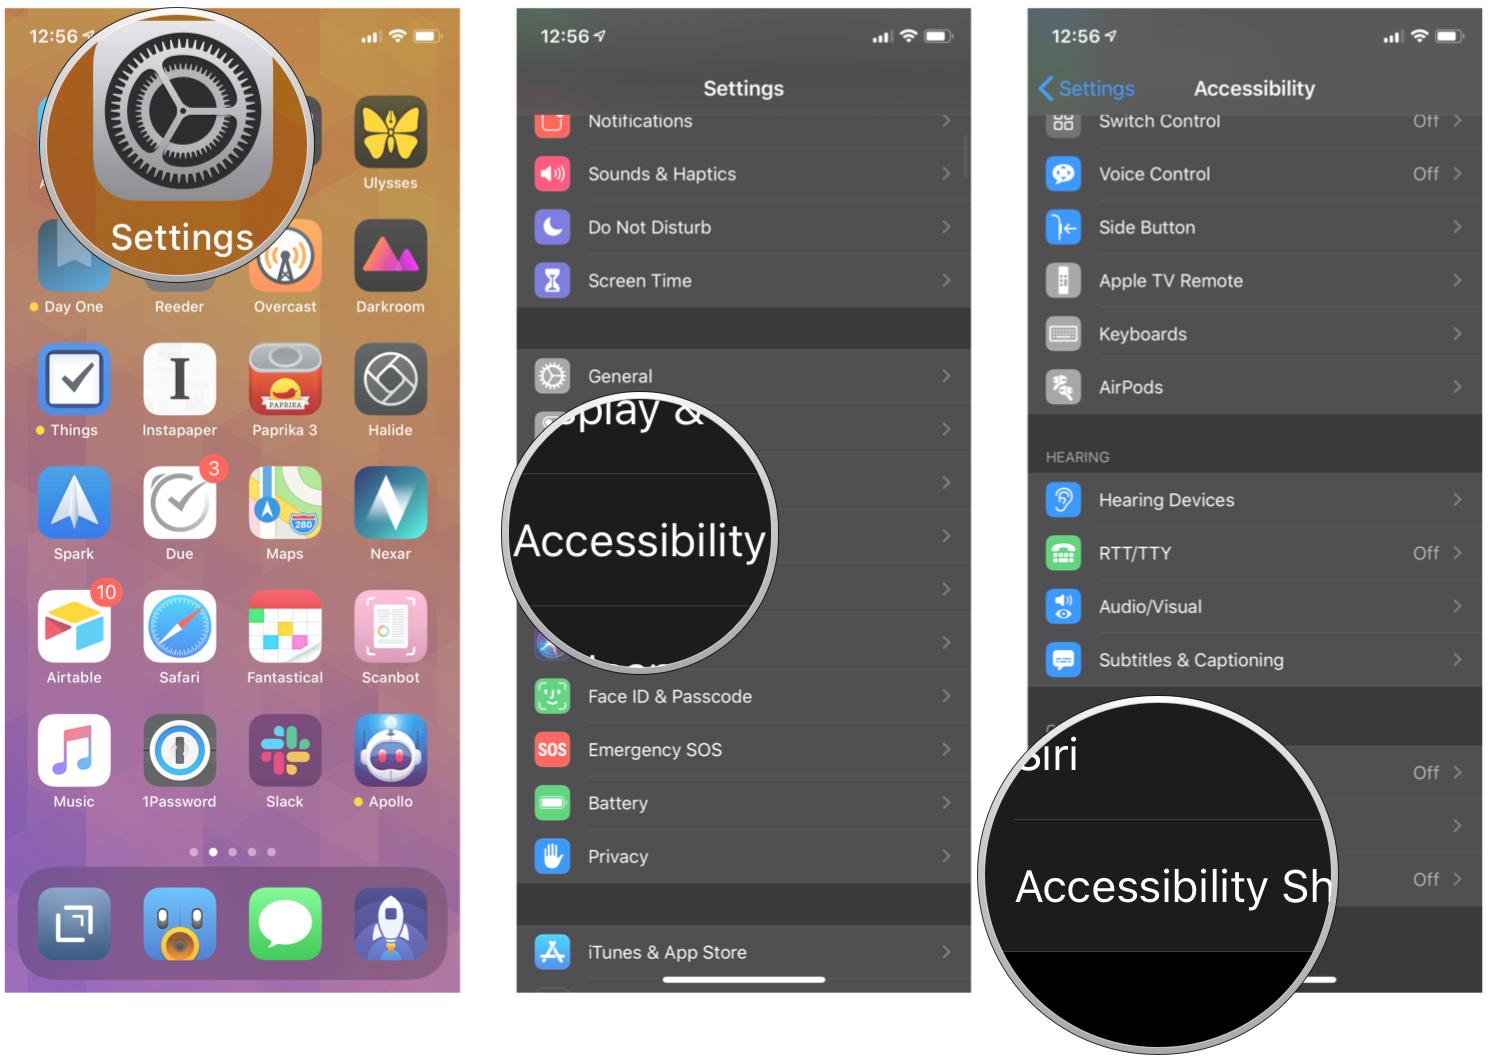 How to use and customize the Accessibility Shortcut on iPhone and iPad by showing steps launch Settings, tap Accessibility, tap Accessibility Shortcut